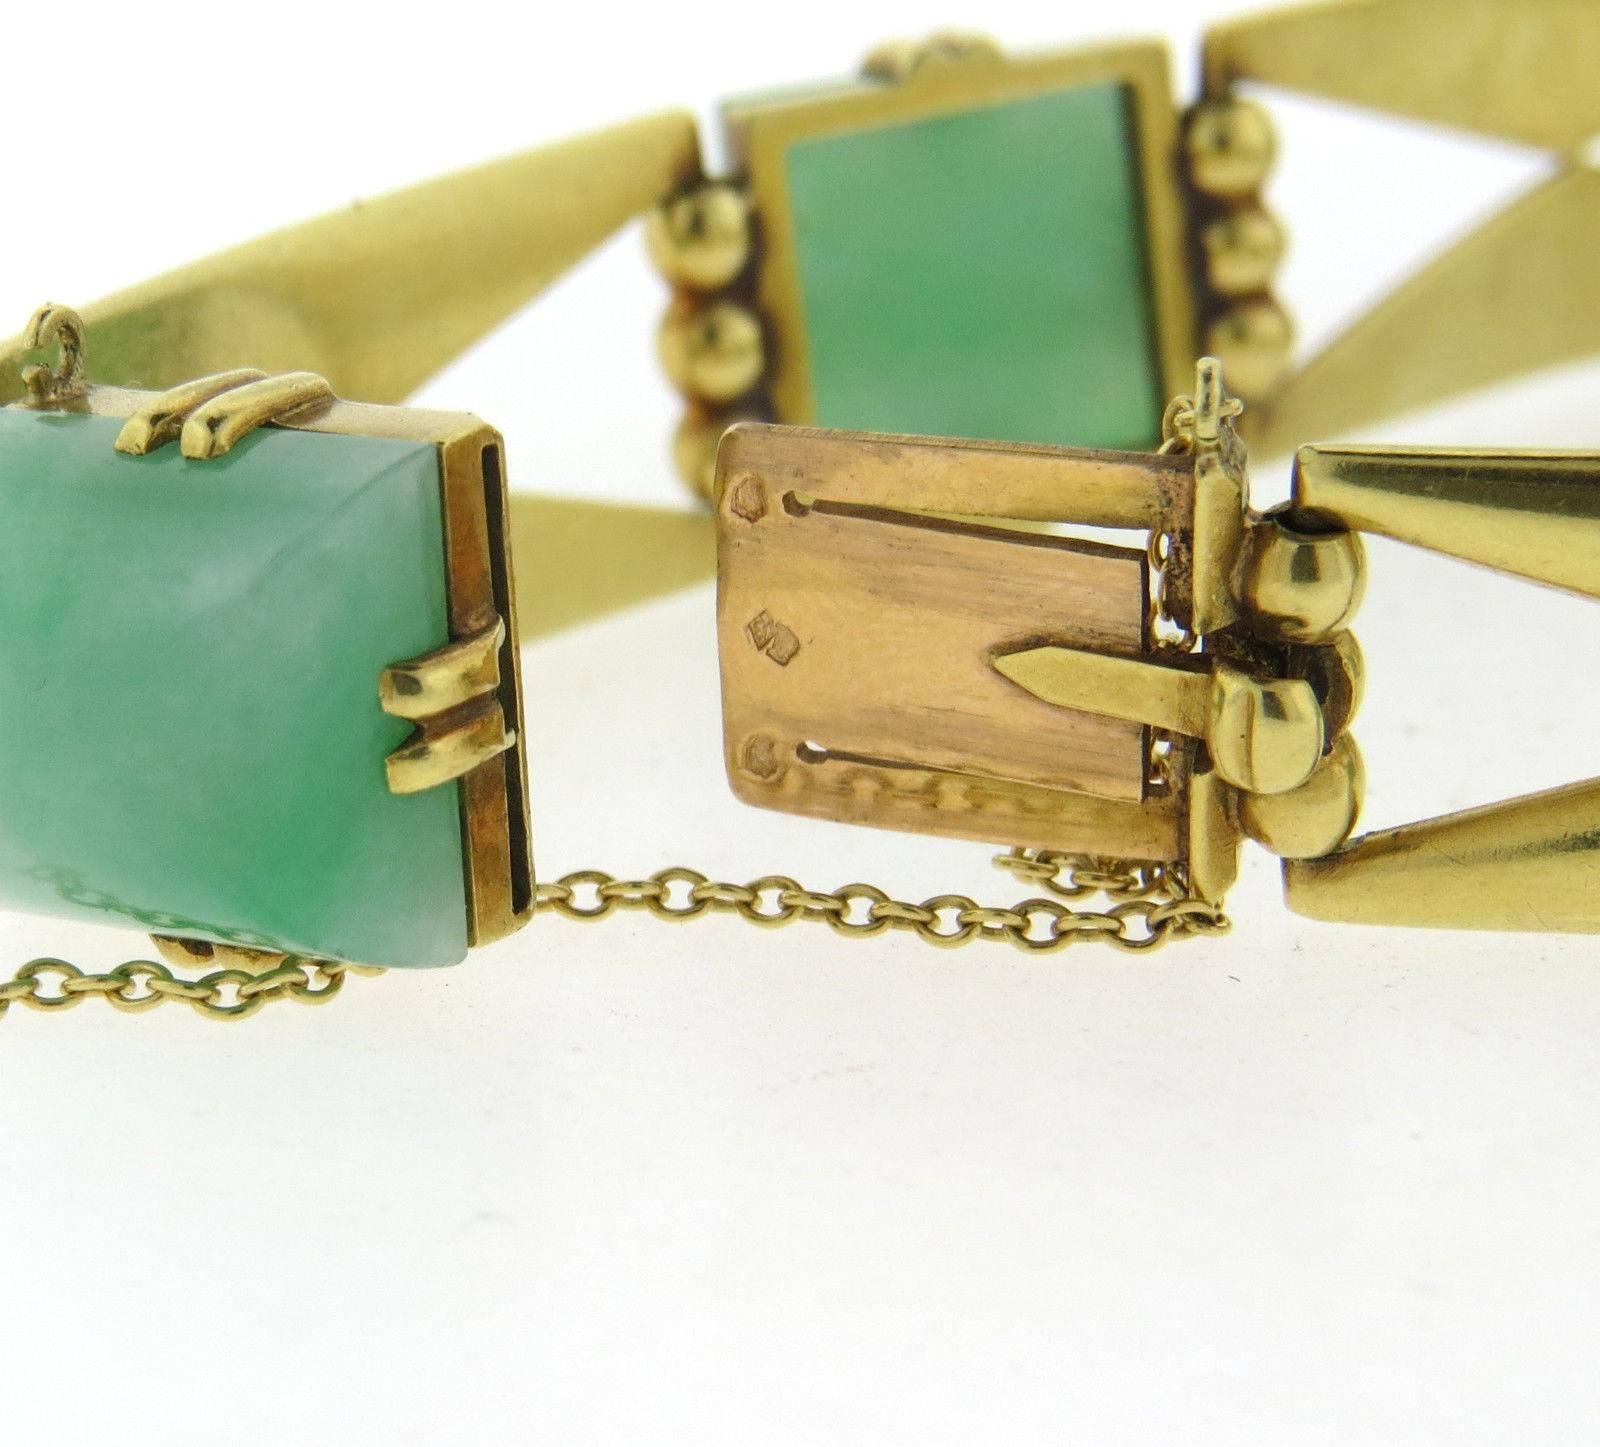 An 18k yellow gold bracelet set with sugarloaf cut jade 12.4mm x 12.4mm.  The bracelet is 7 1/4